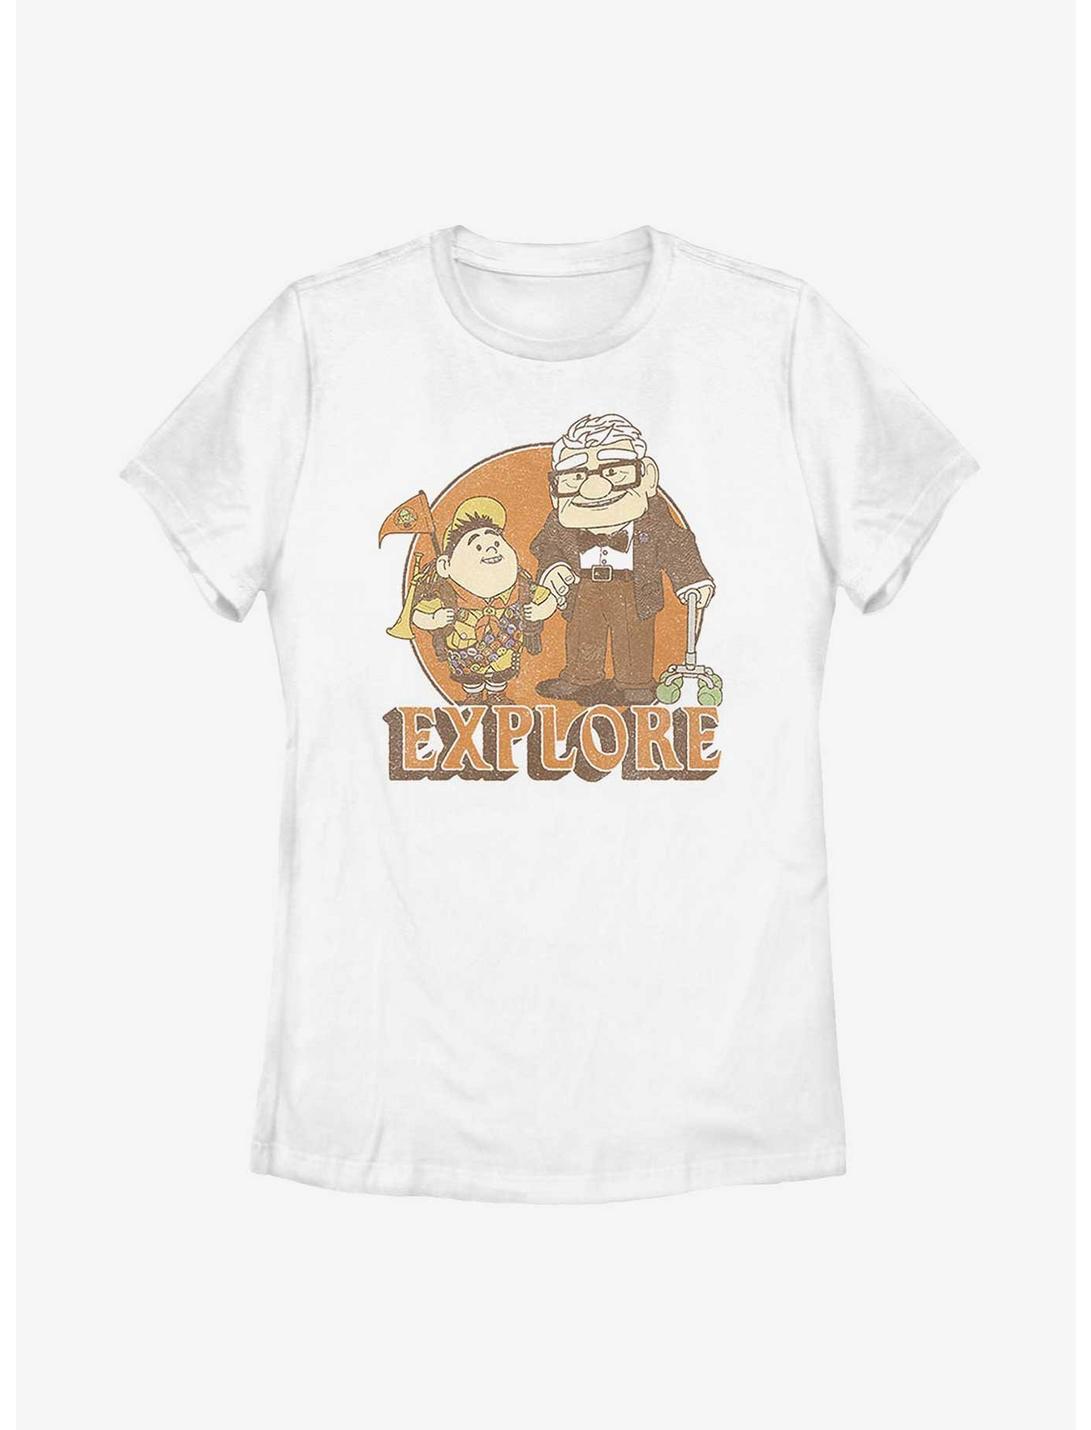 Disney Pixar Up Russell and Carl Explore Womens T-Shirt, WHITE, hi-res